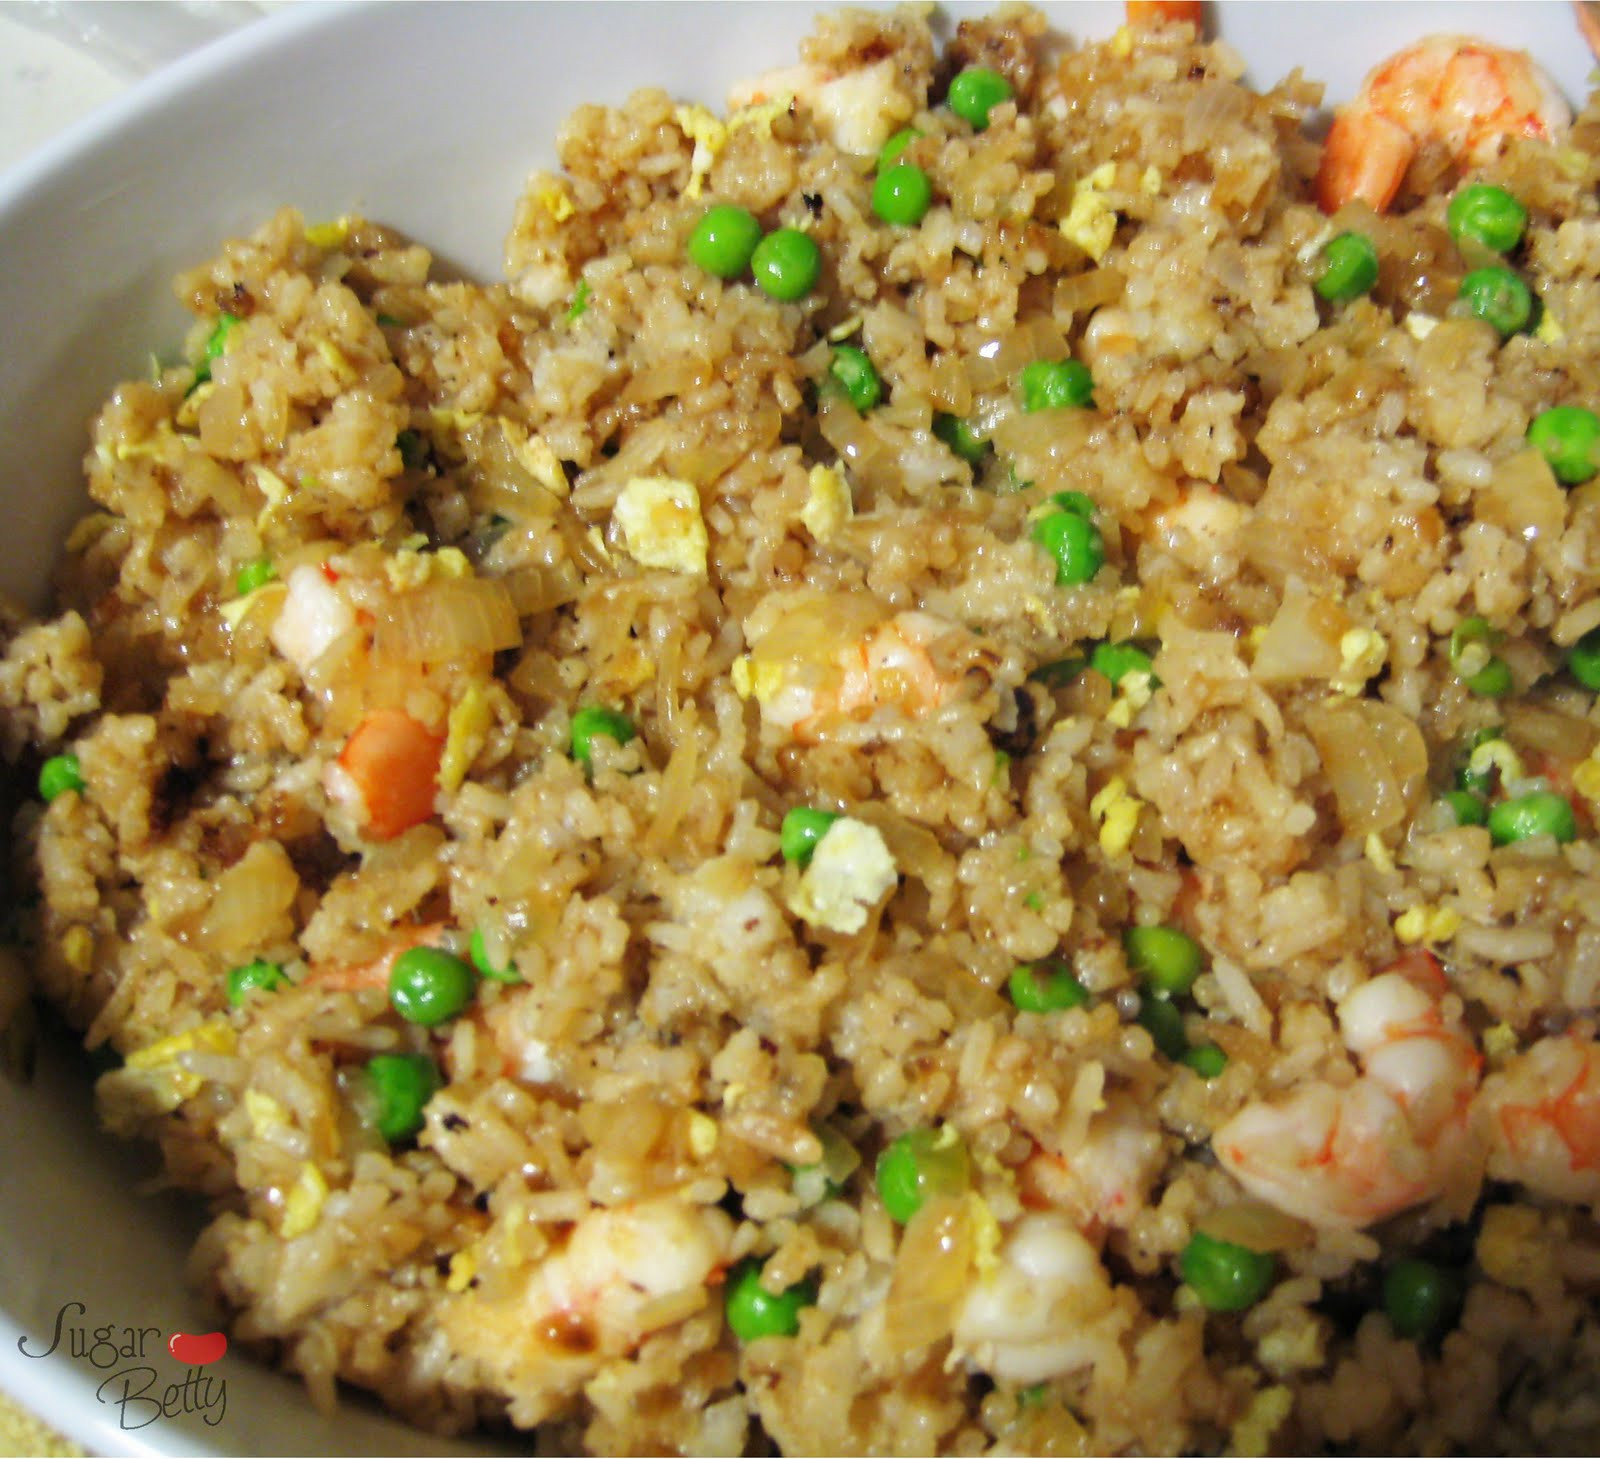 Special Fried Rice Disease
 Sugar Betty Shrimp Fried Rice